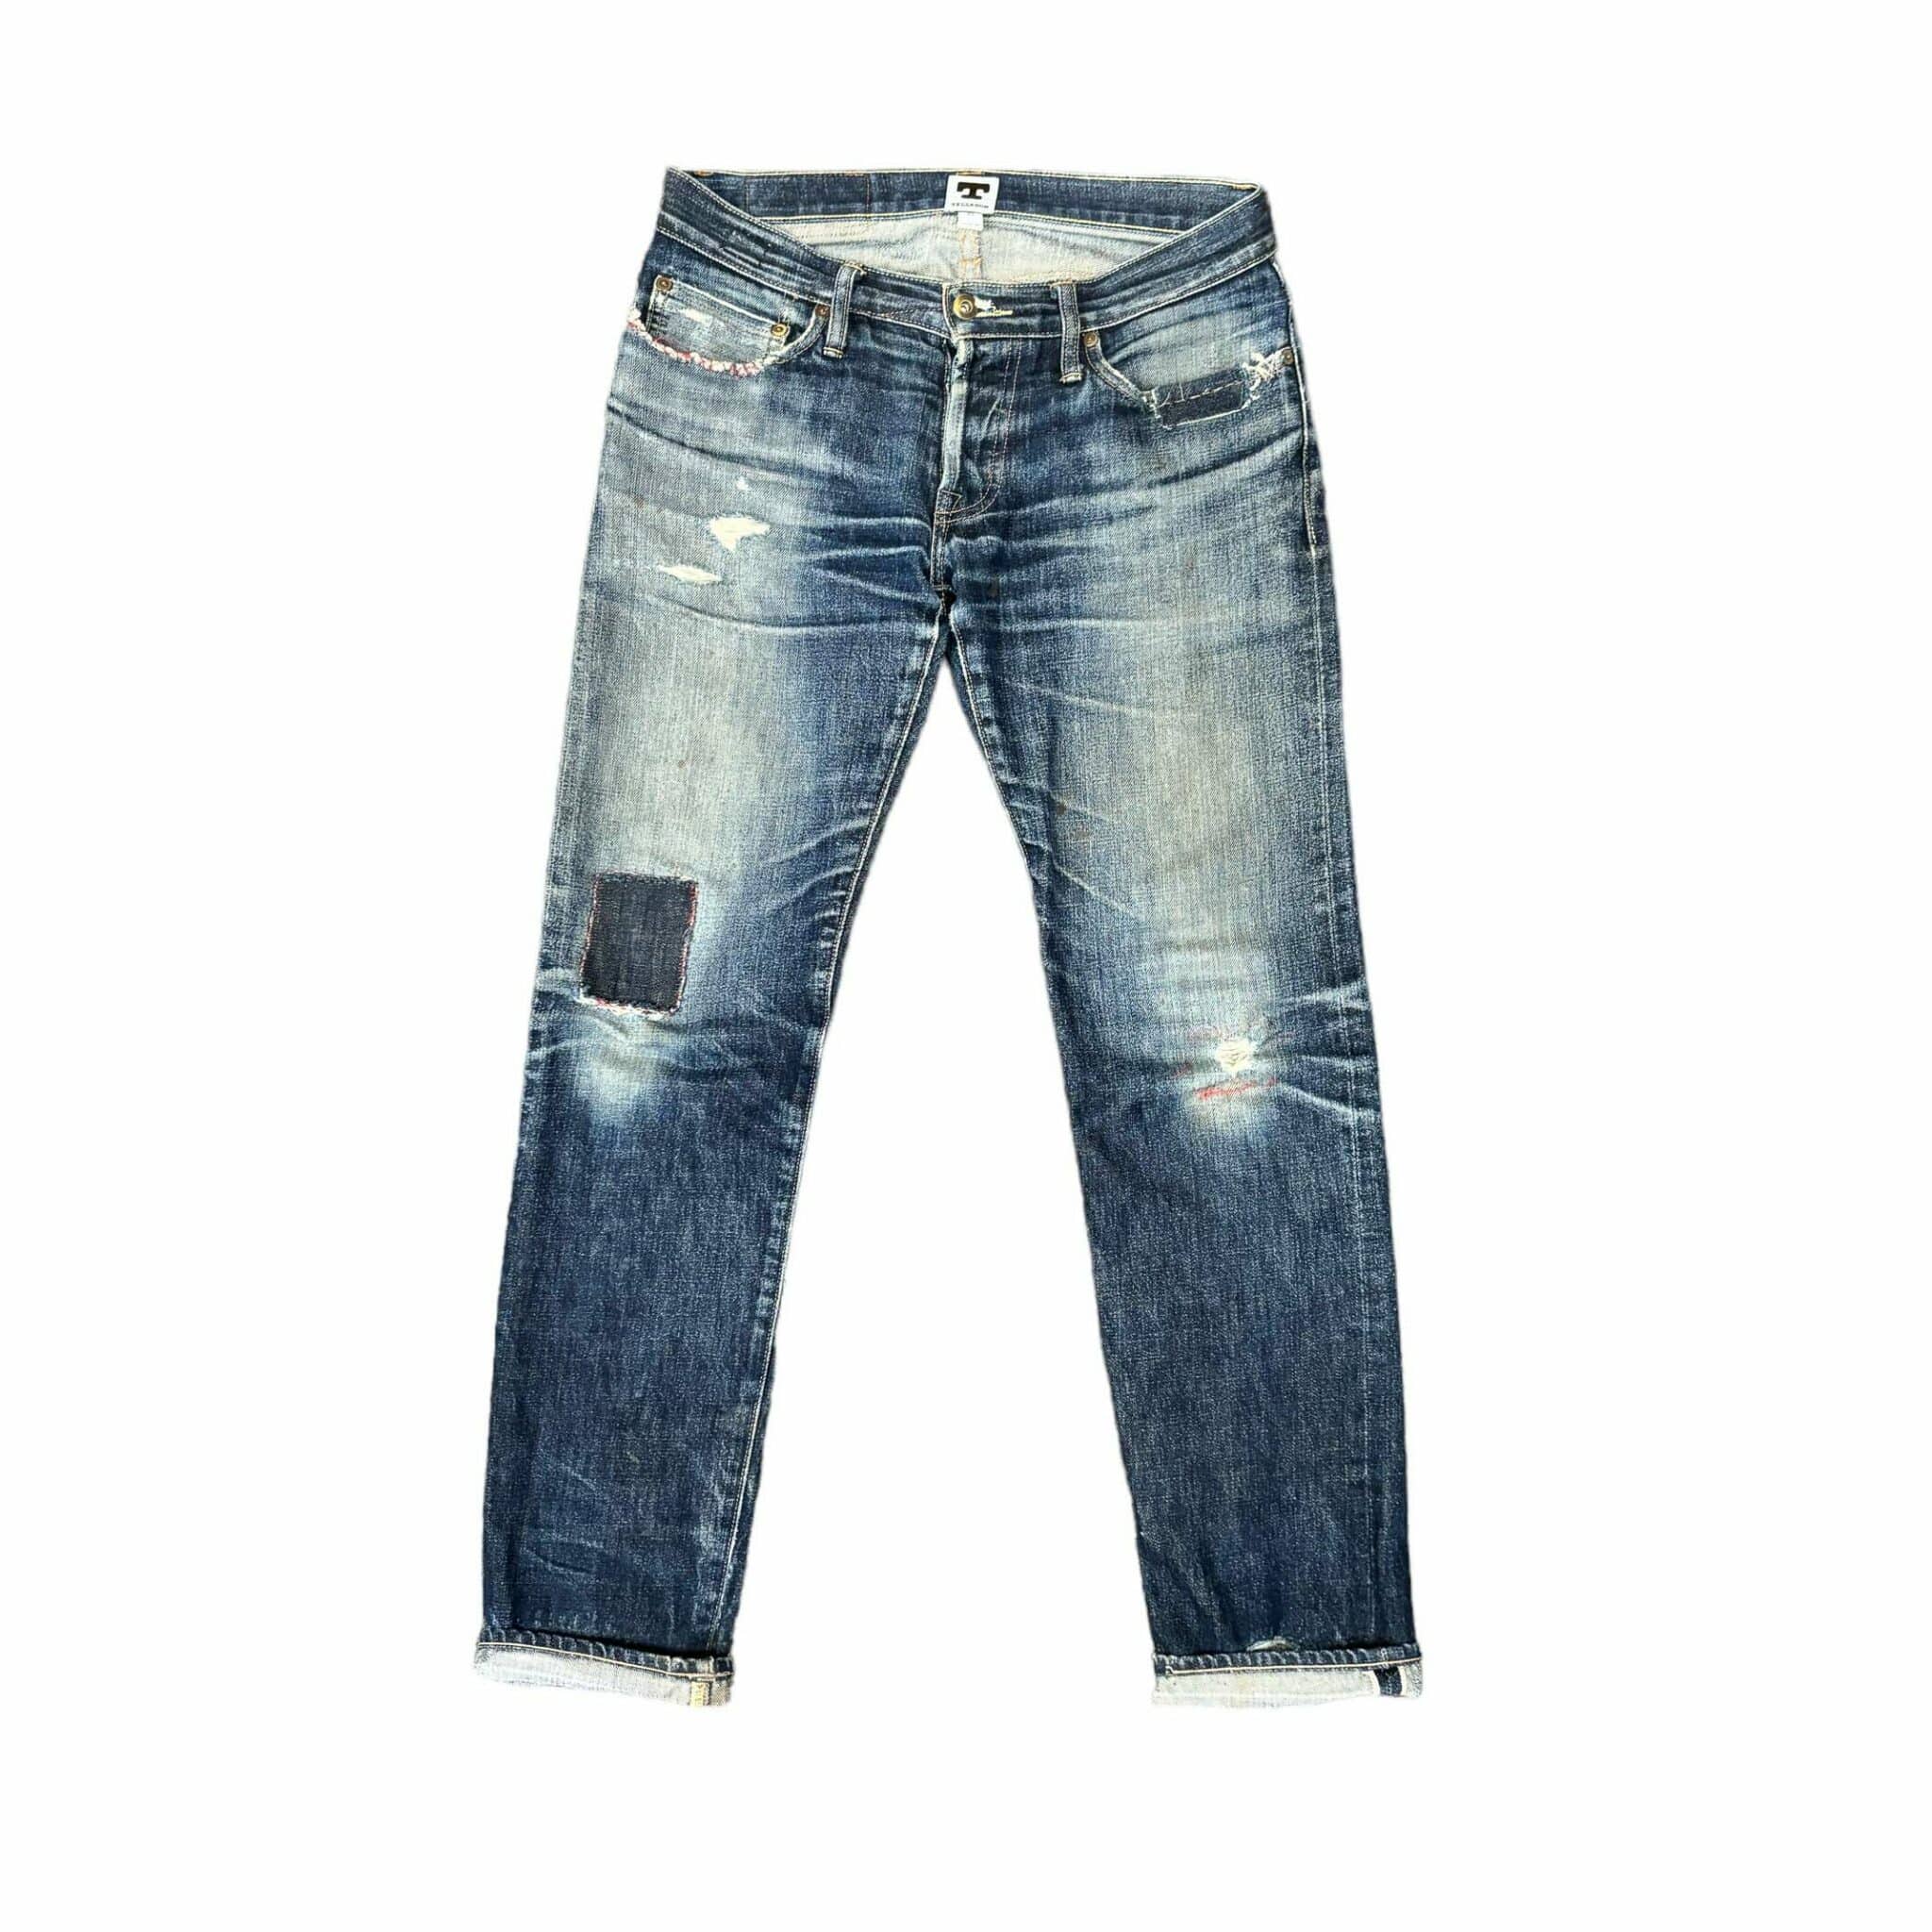 Bay Area Beauties: Five Iconic Pieces from Tellason - Denimhunters